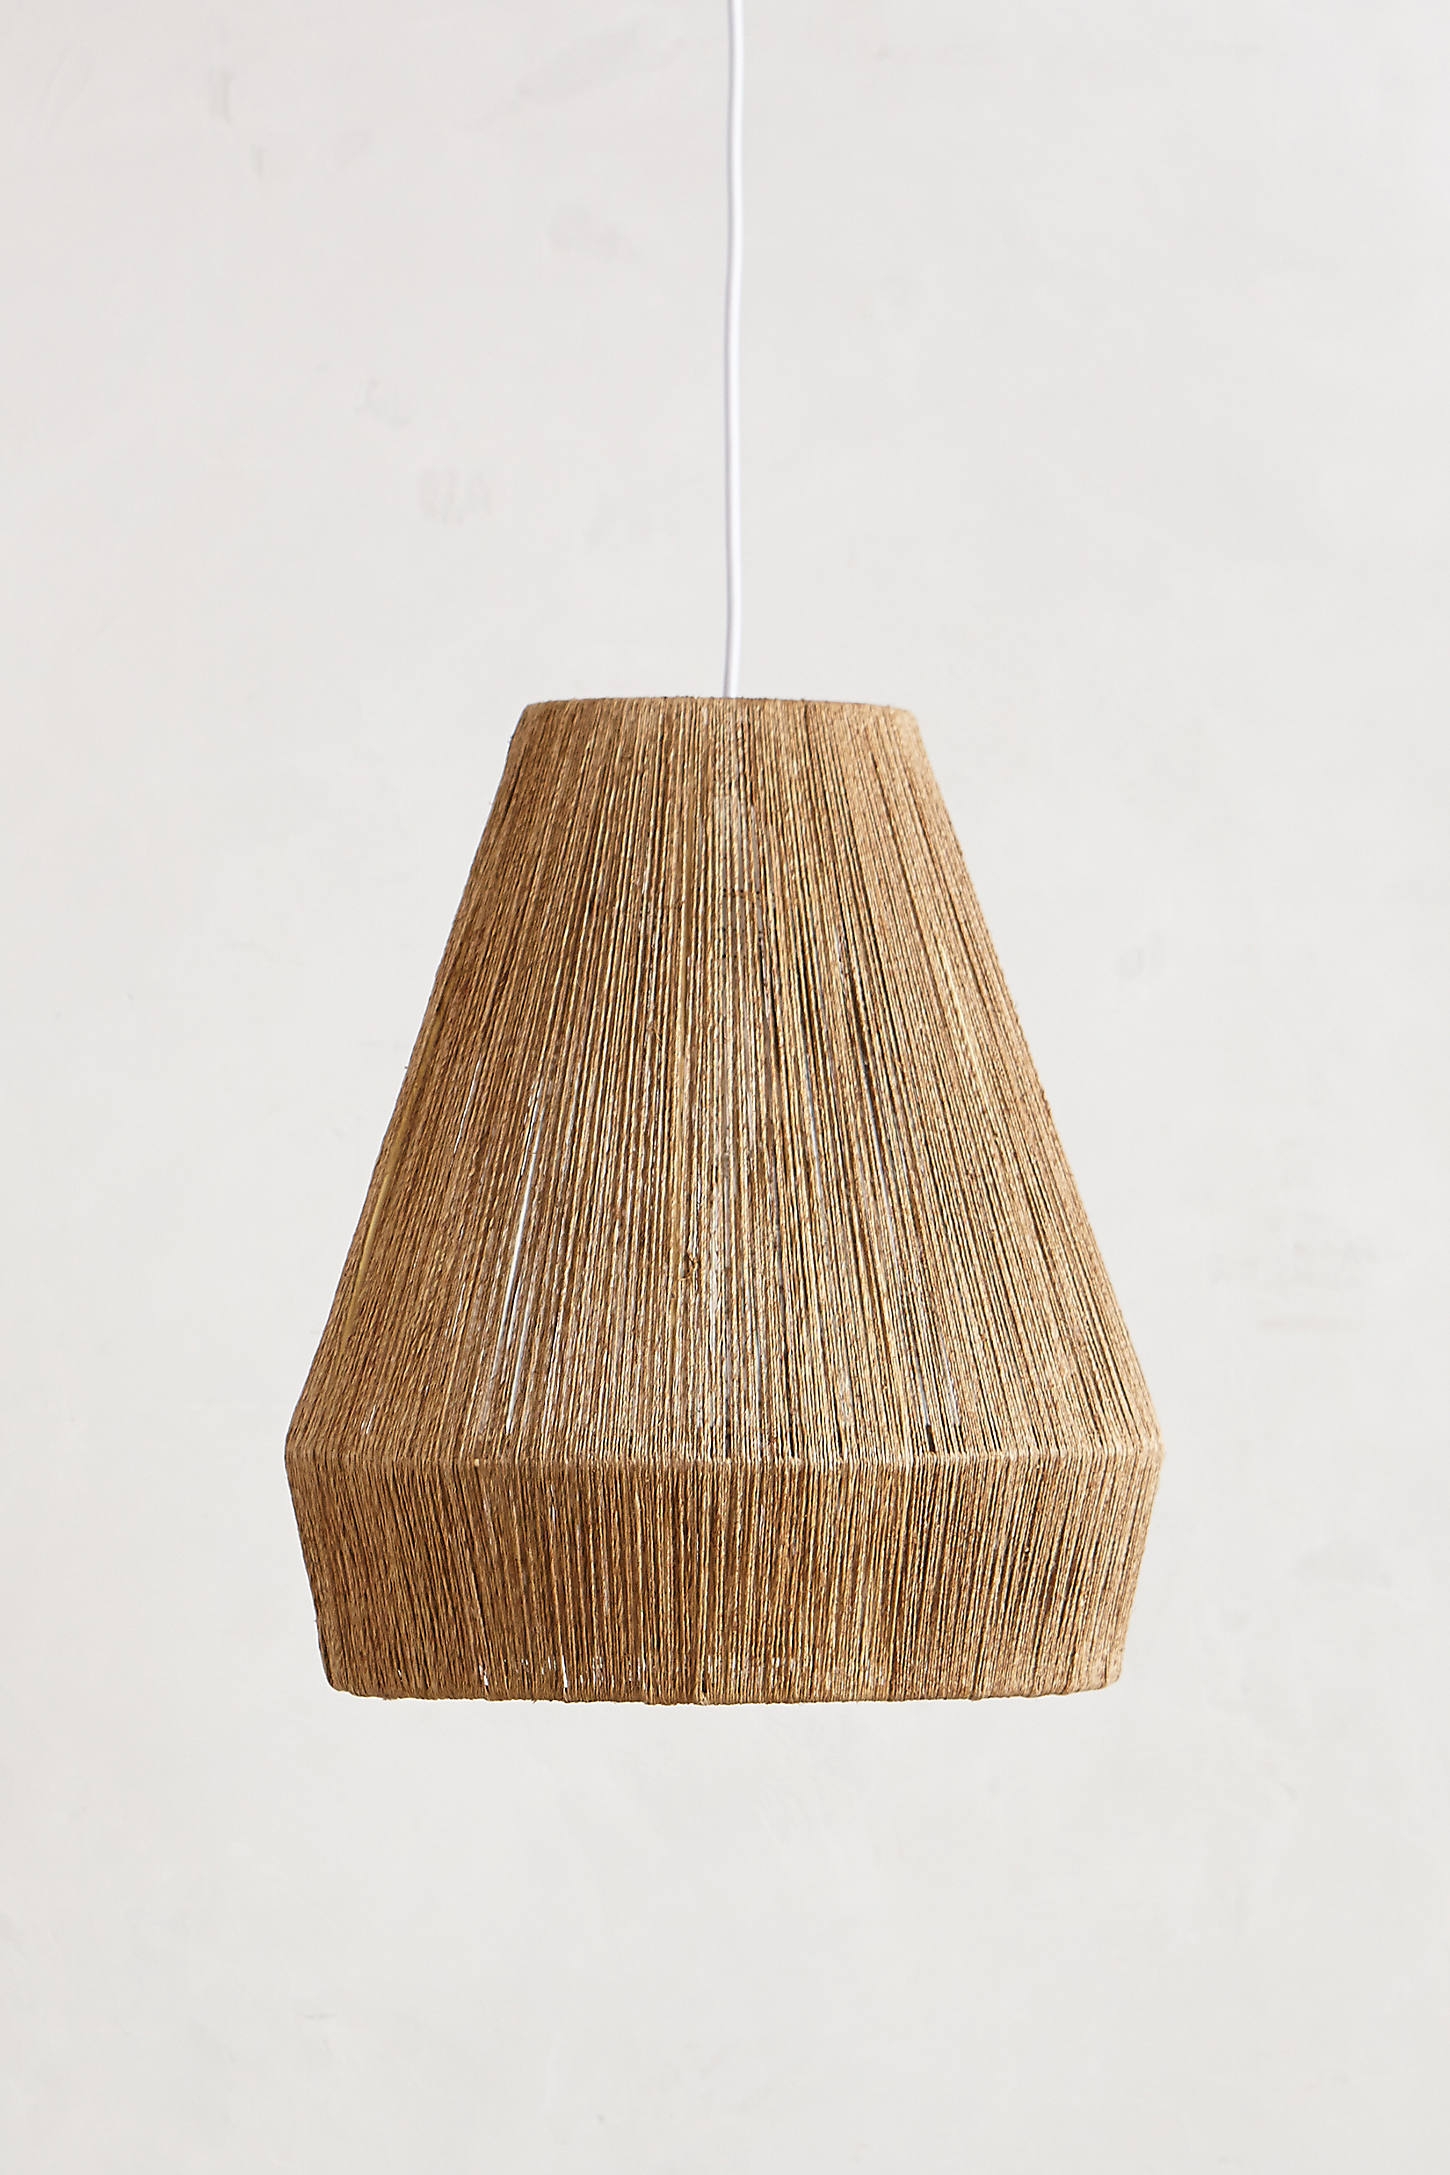 Bungalow Pendant By Anthropologie in Beige - Image 0